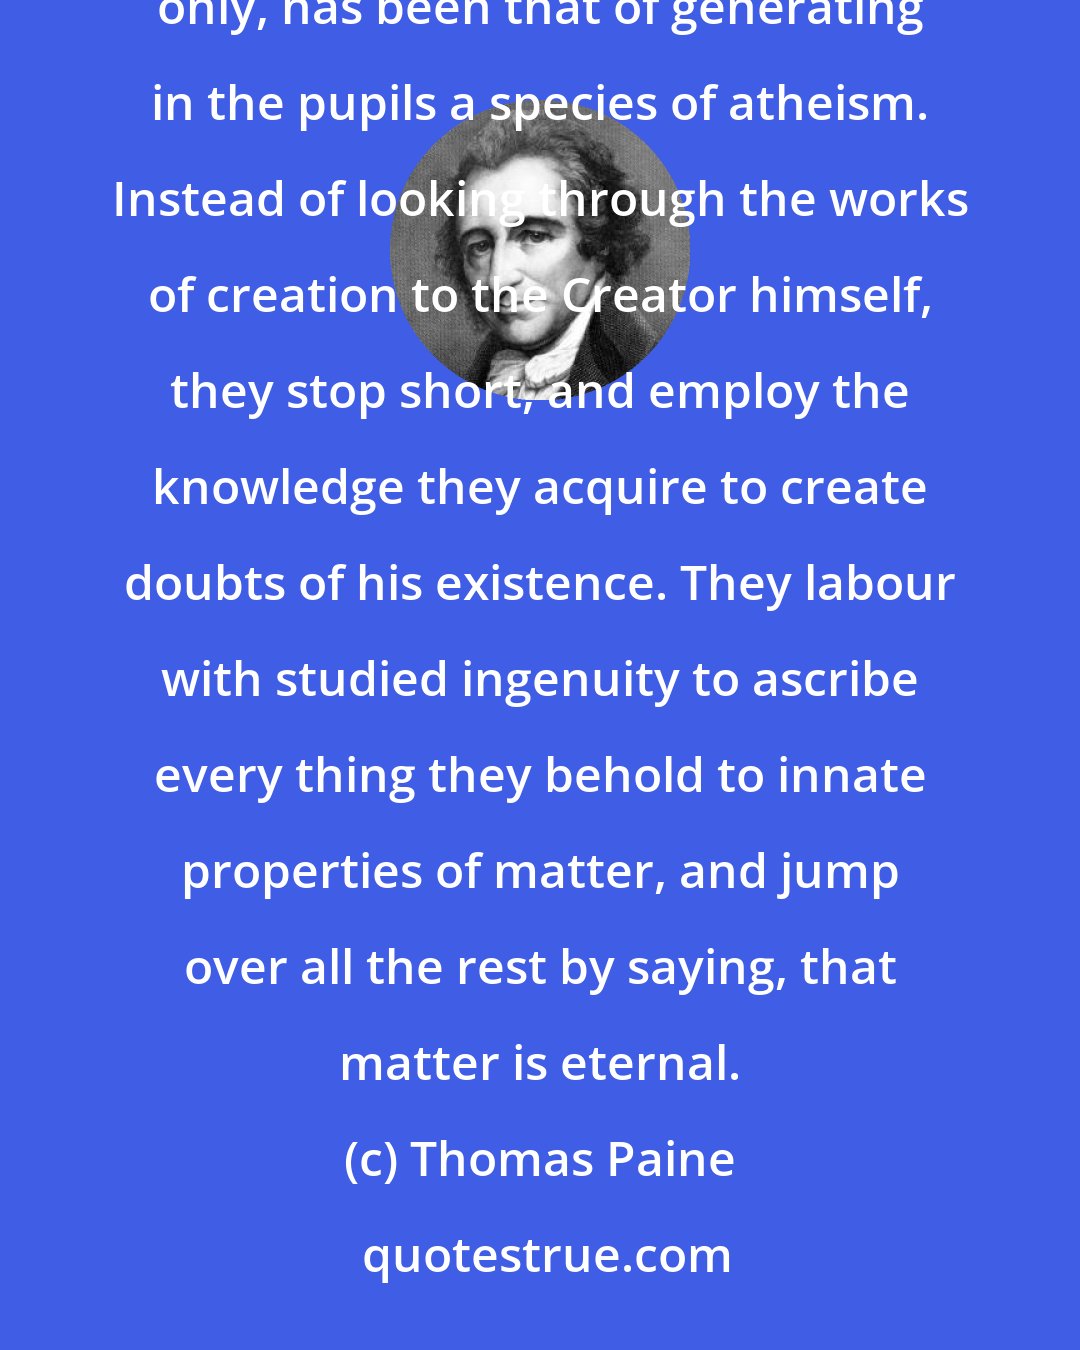 Thomas Paine: The evil that has resulted from the error of the schools, in teaching natural philosophy as an accomplishment only, has been that of generating in the pupils a species of atheism. Instead of looking through the works of creation to the Creator himself, they stop short, and employ the knowledge they acquire to create doubts of his existence. They labour with studied ingenuity to ascribe every thing they behold to innate properties of matter, and jump over all the rest by saying, that matter is eternal.